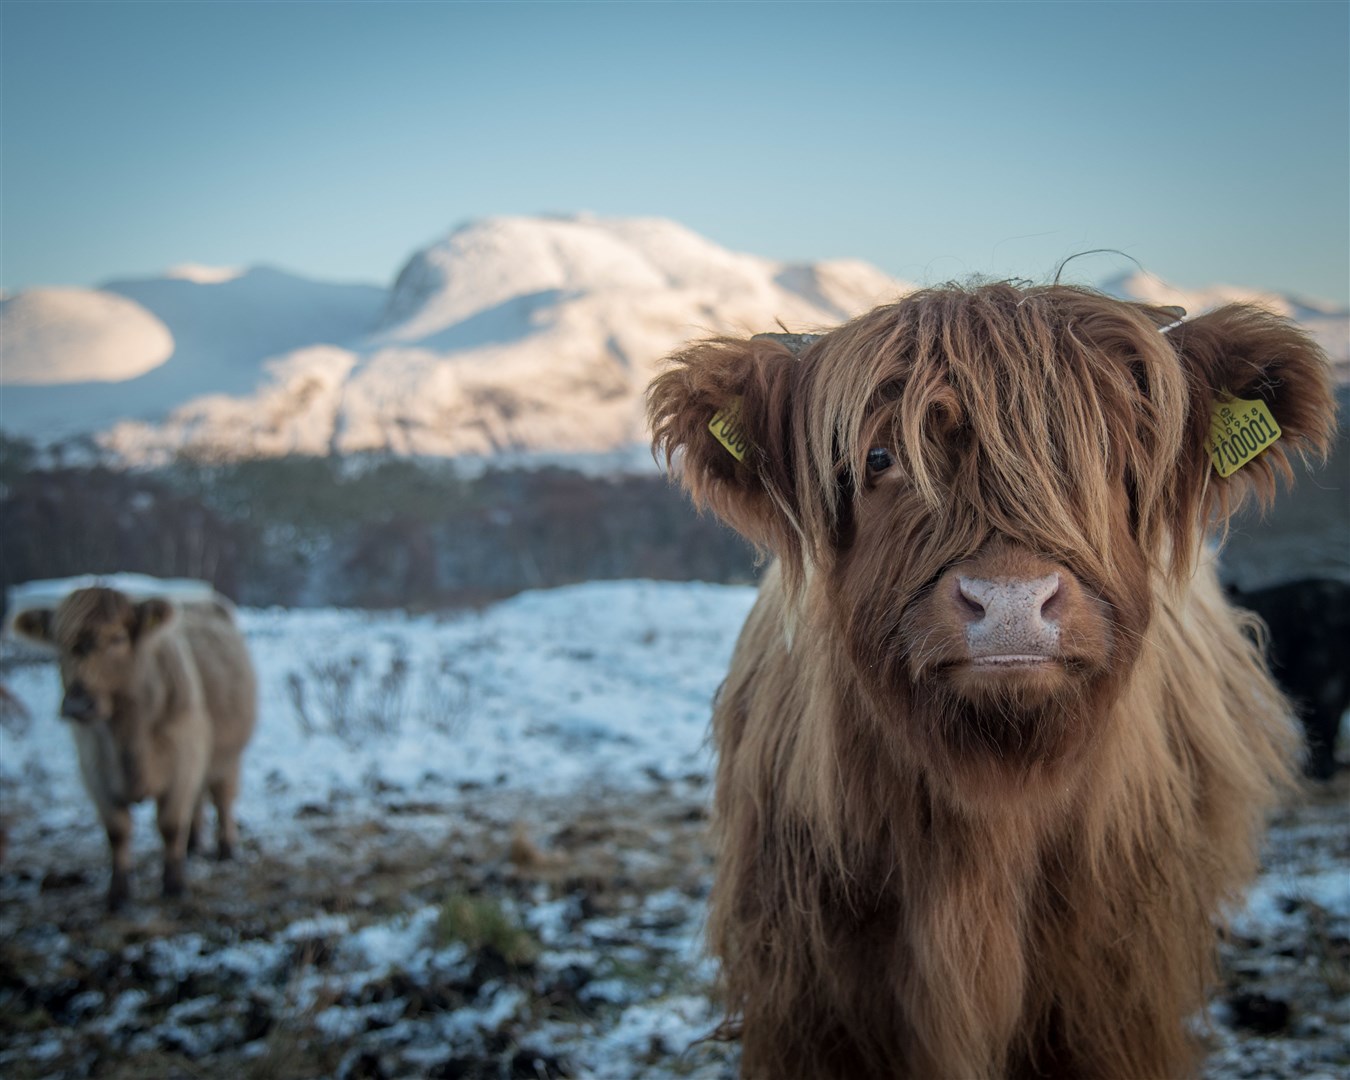 Highland cattle feature on the card sent by Kate Forbes.